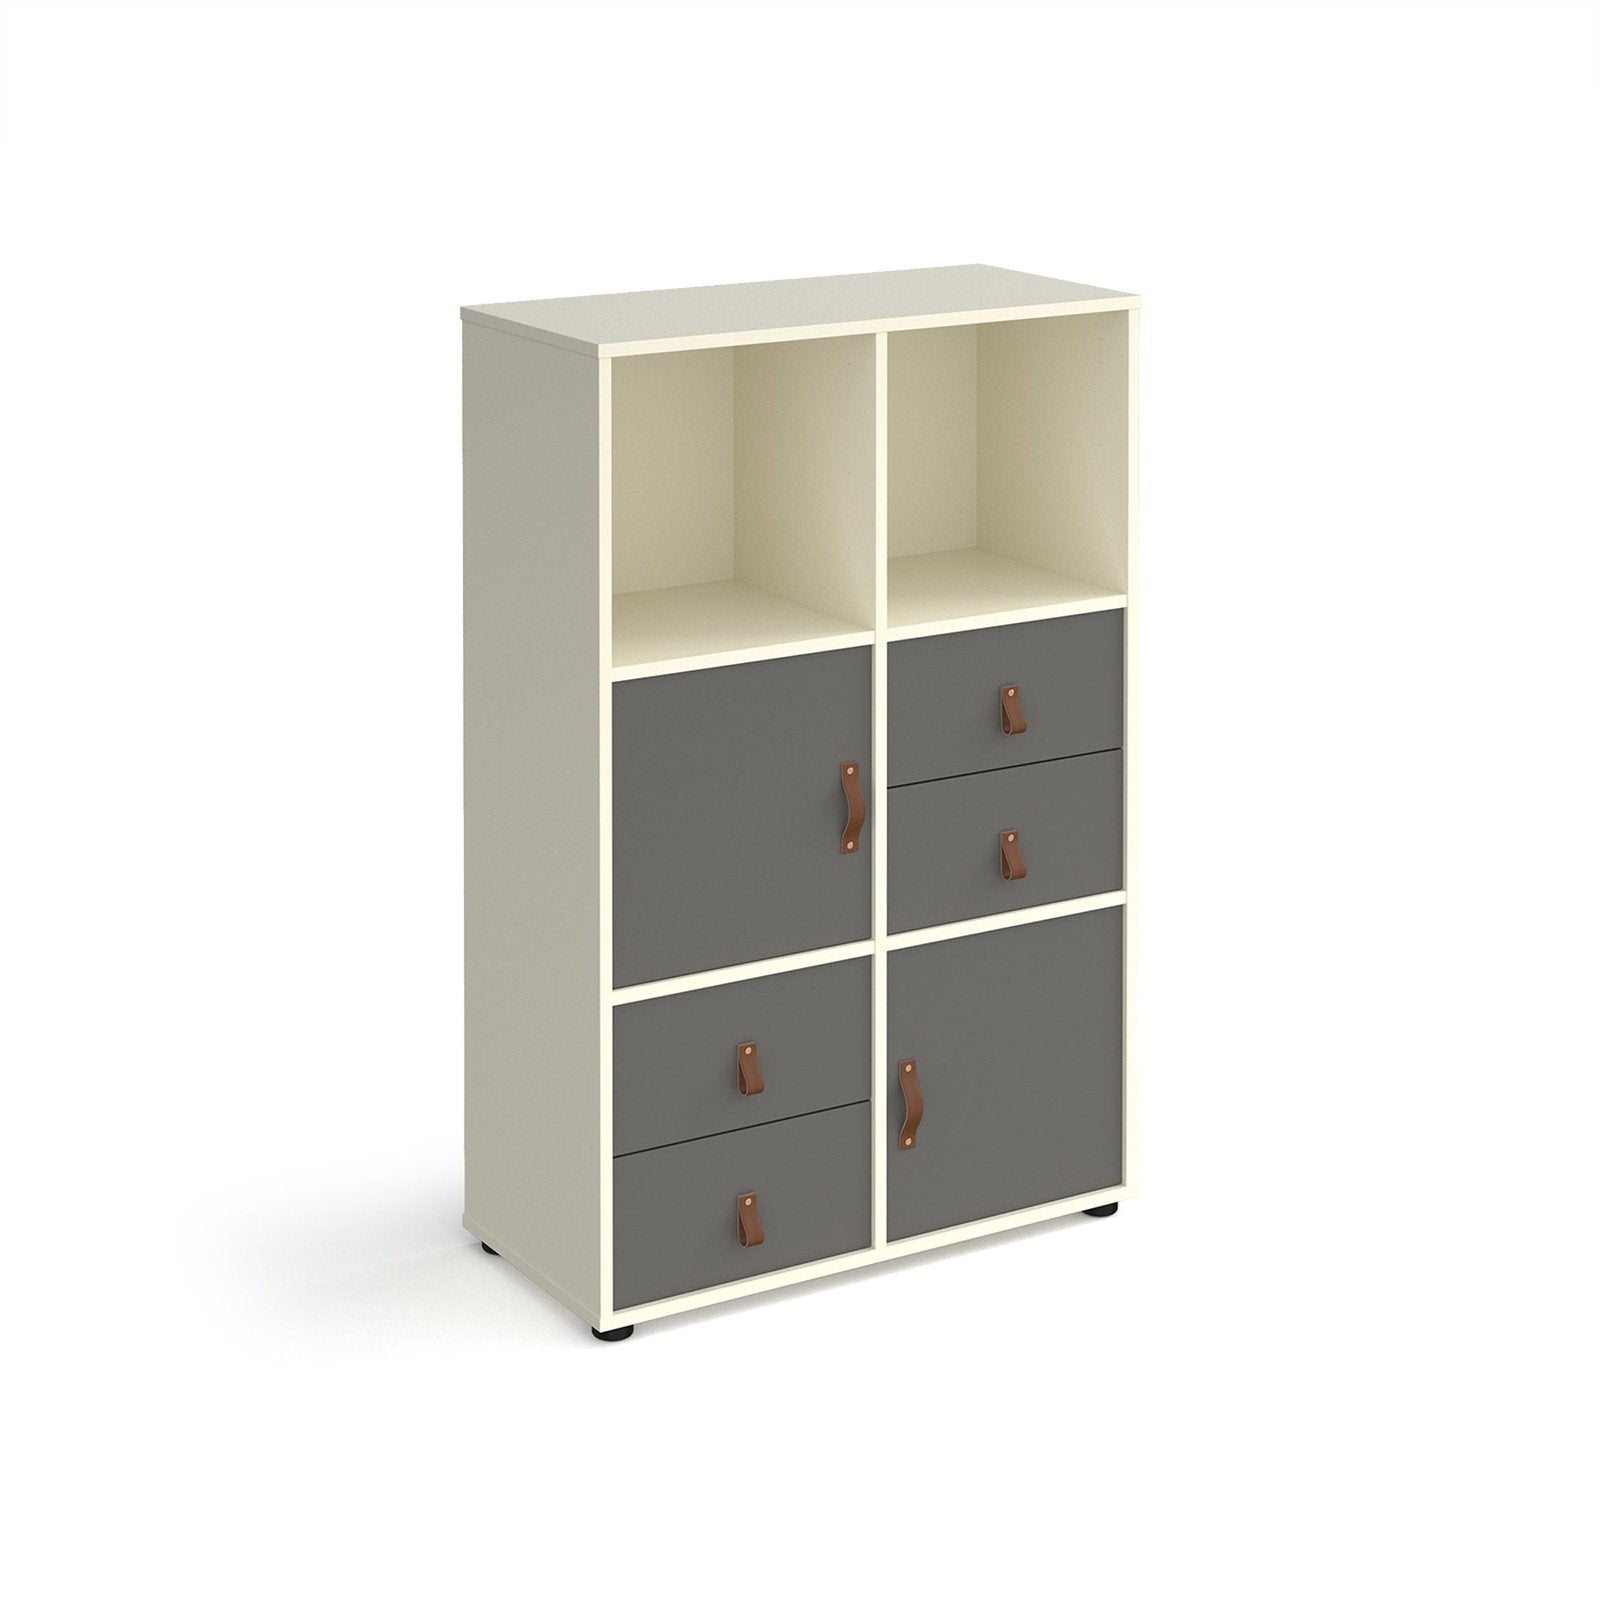 Universal cube storage unit 1295mm high on glides with cupboards and 2 sets of drawers - Office Products Online